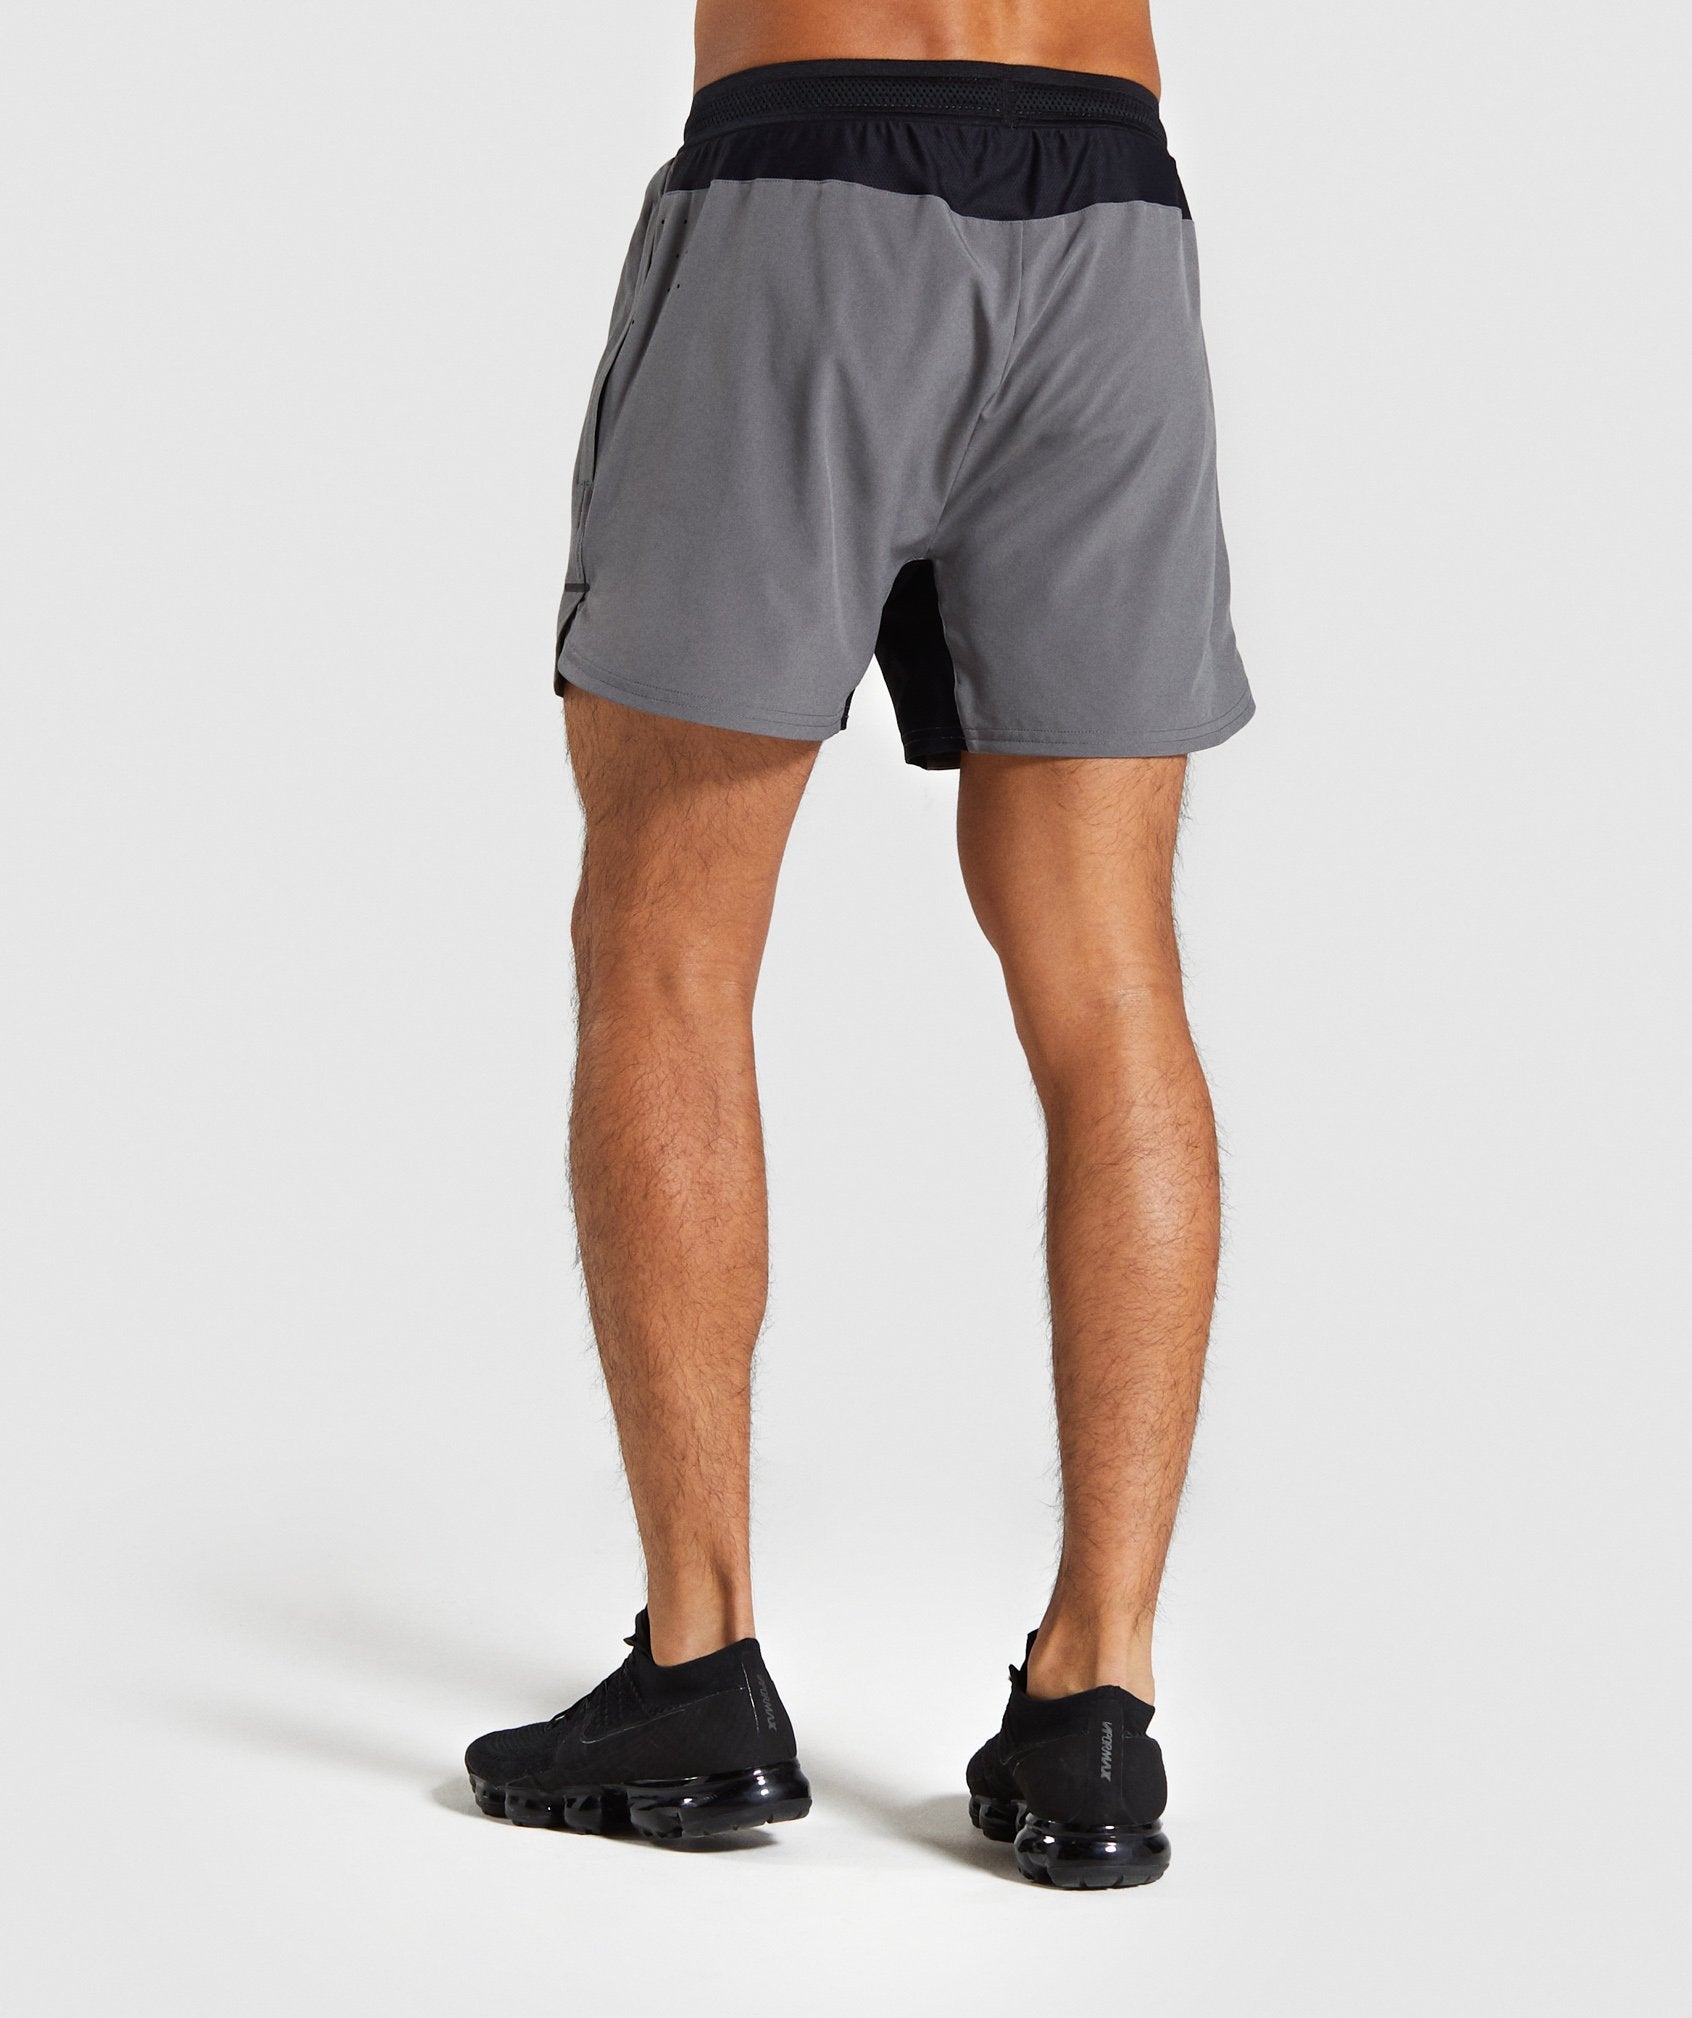 Speed Shorts in Grey - view 2